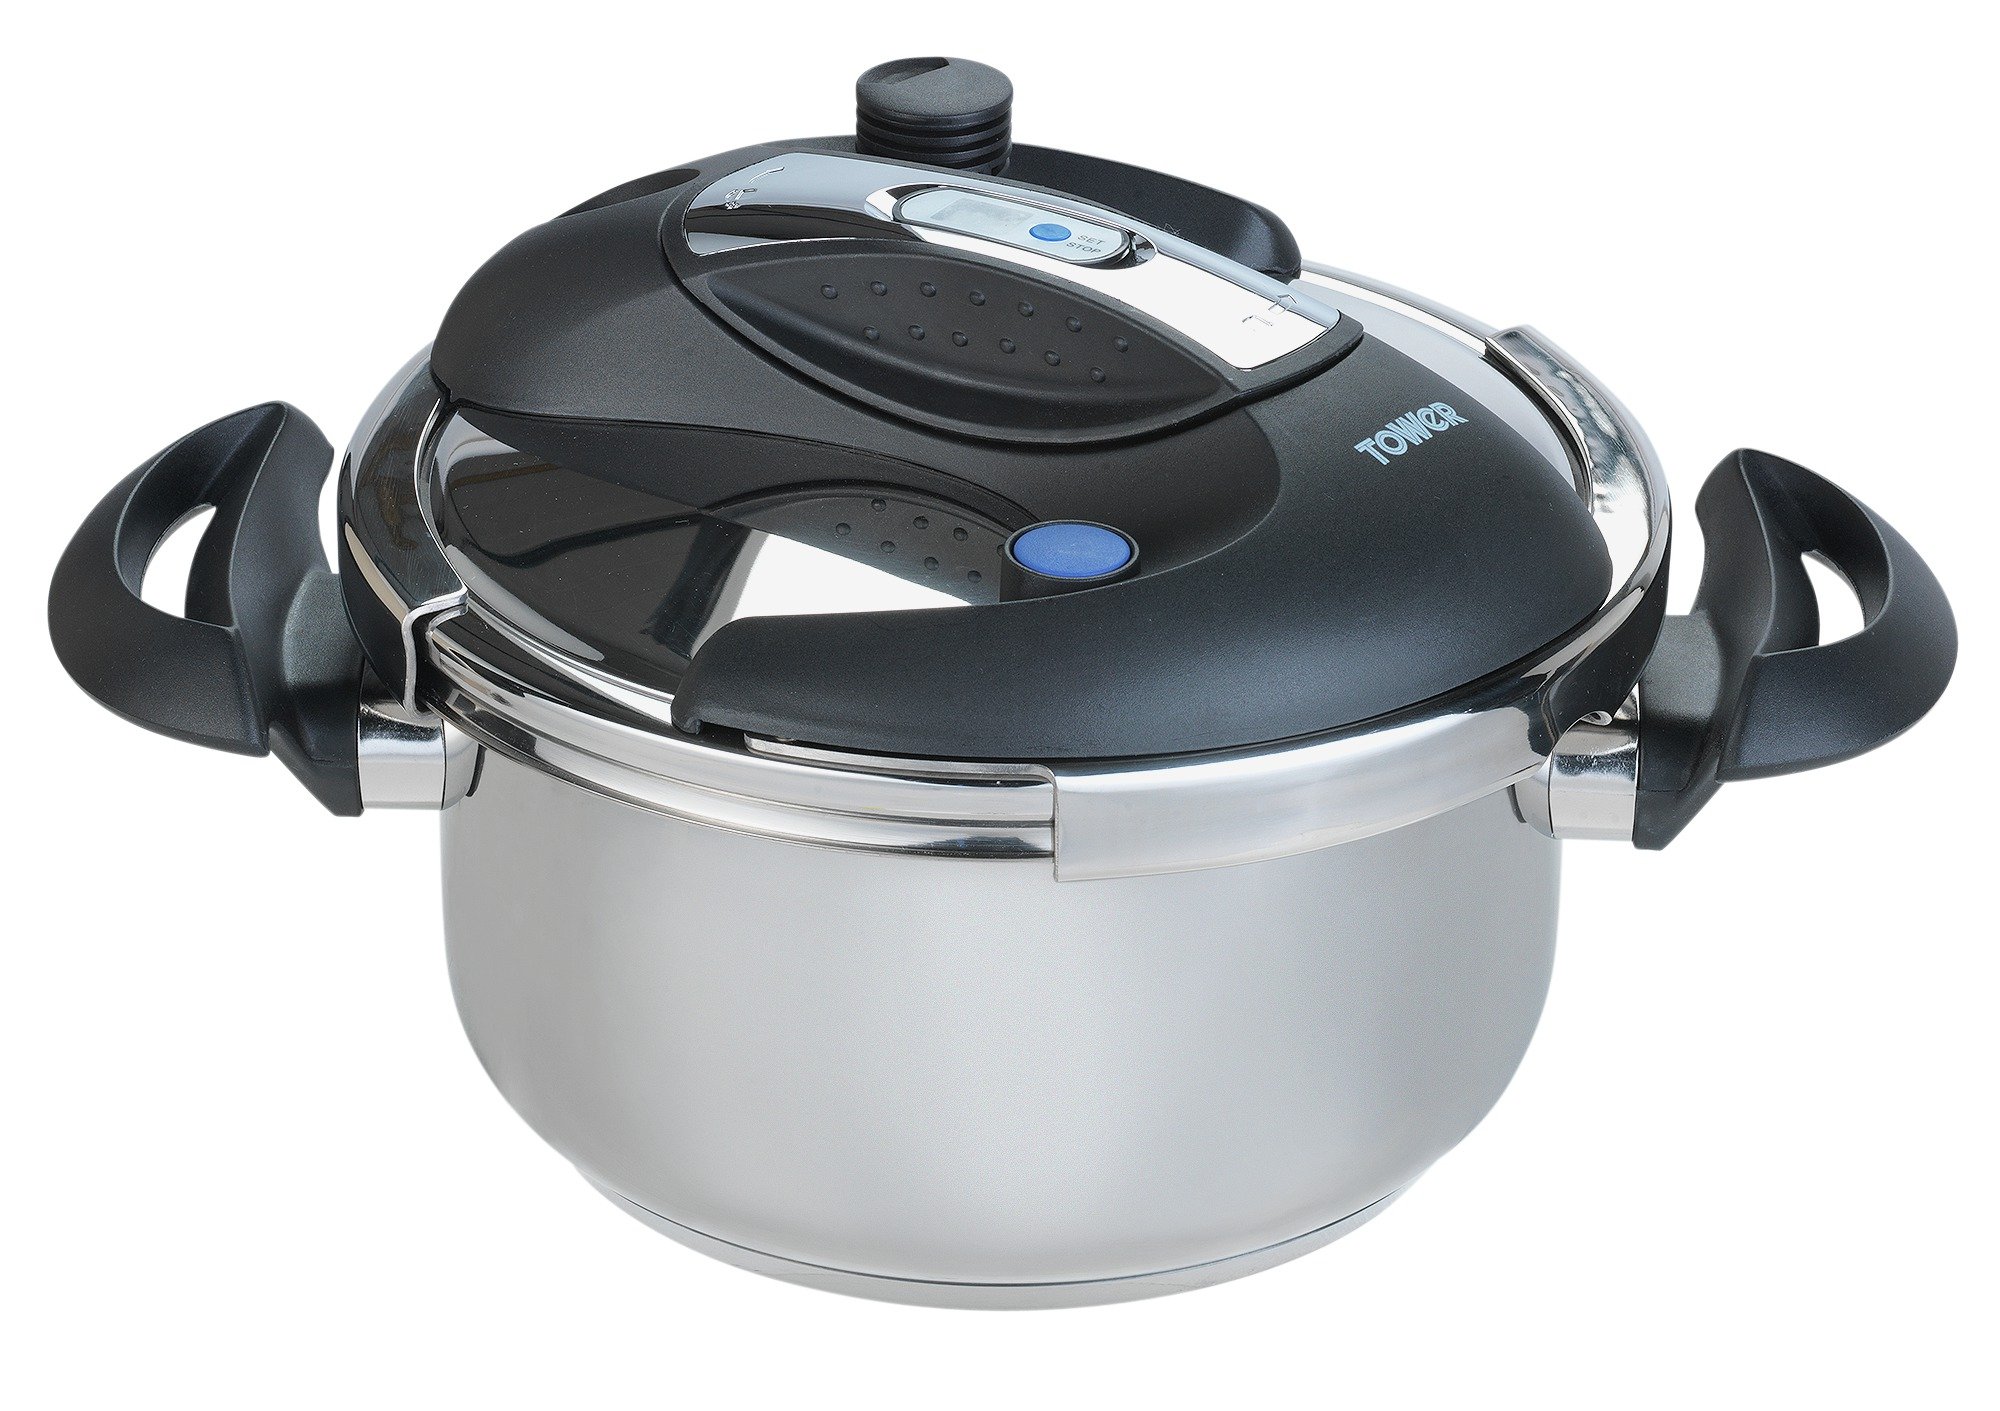 Tower Pro 4 Litre One Touch Pressure Cooker